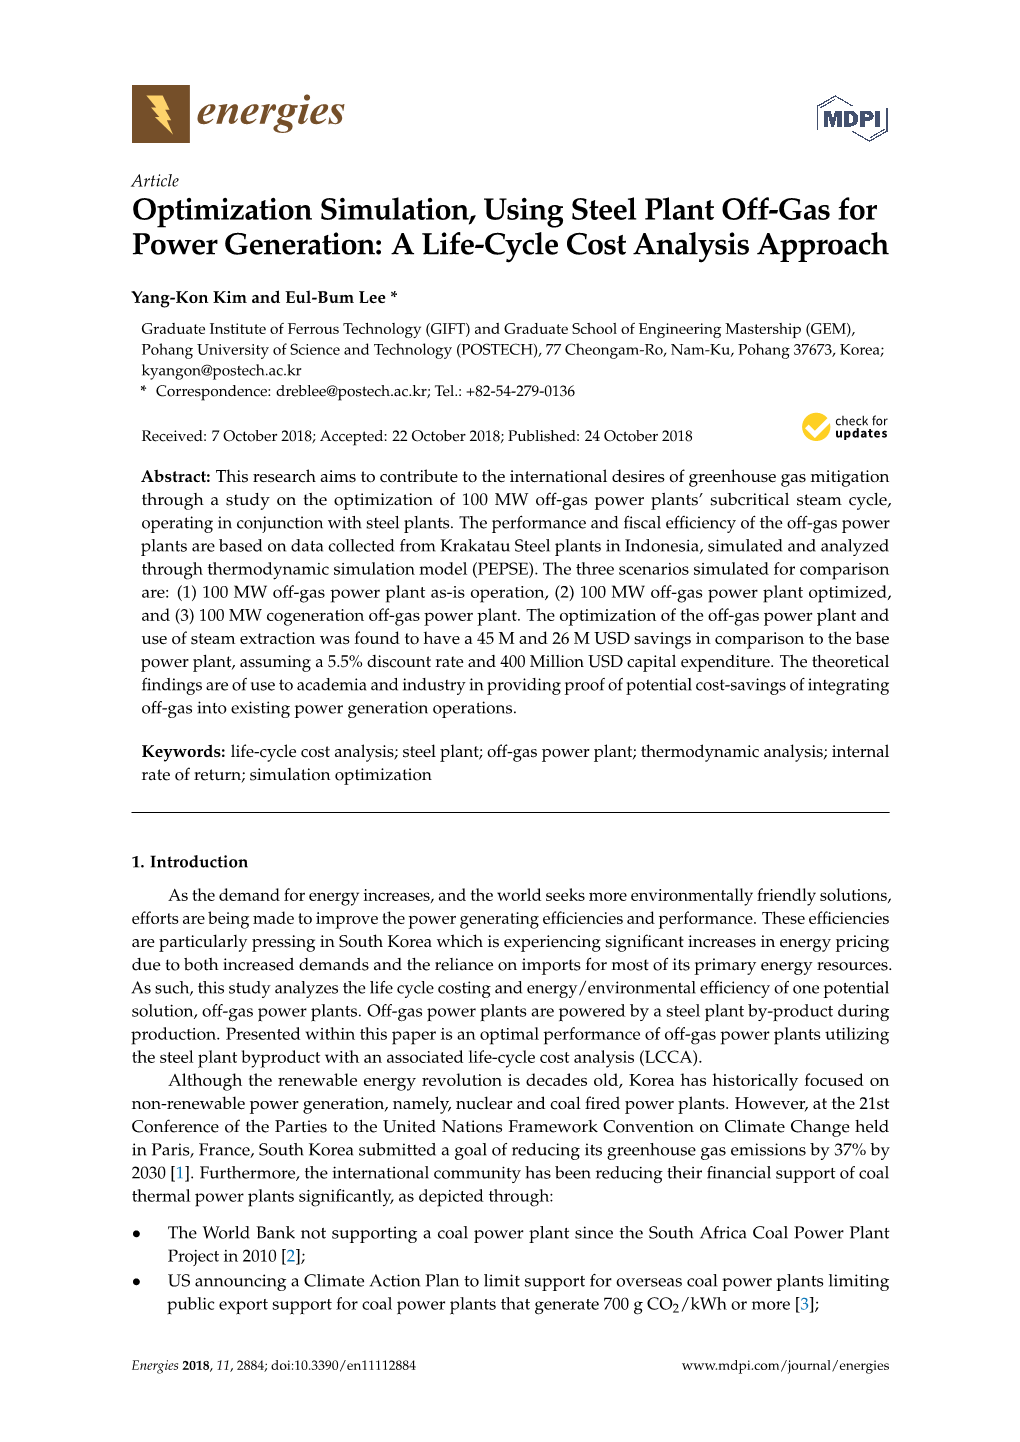 Optimization Simulation, Using Steel Plant Off-Gas for Power Generation: a Life-Cycle Cost Analysis Approach